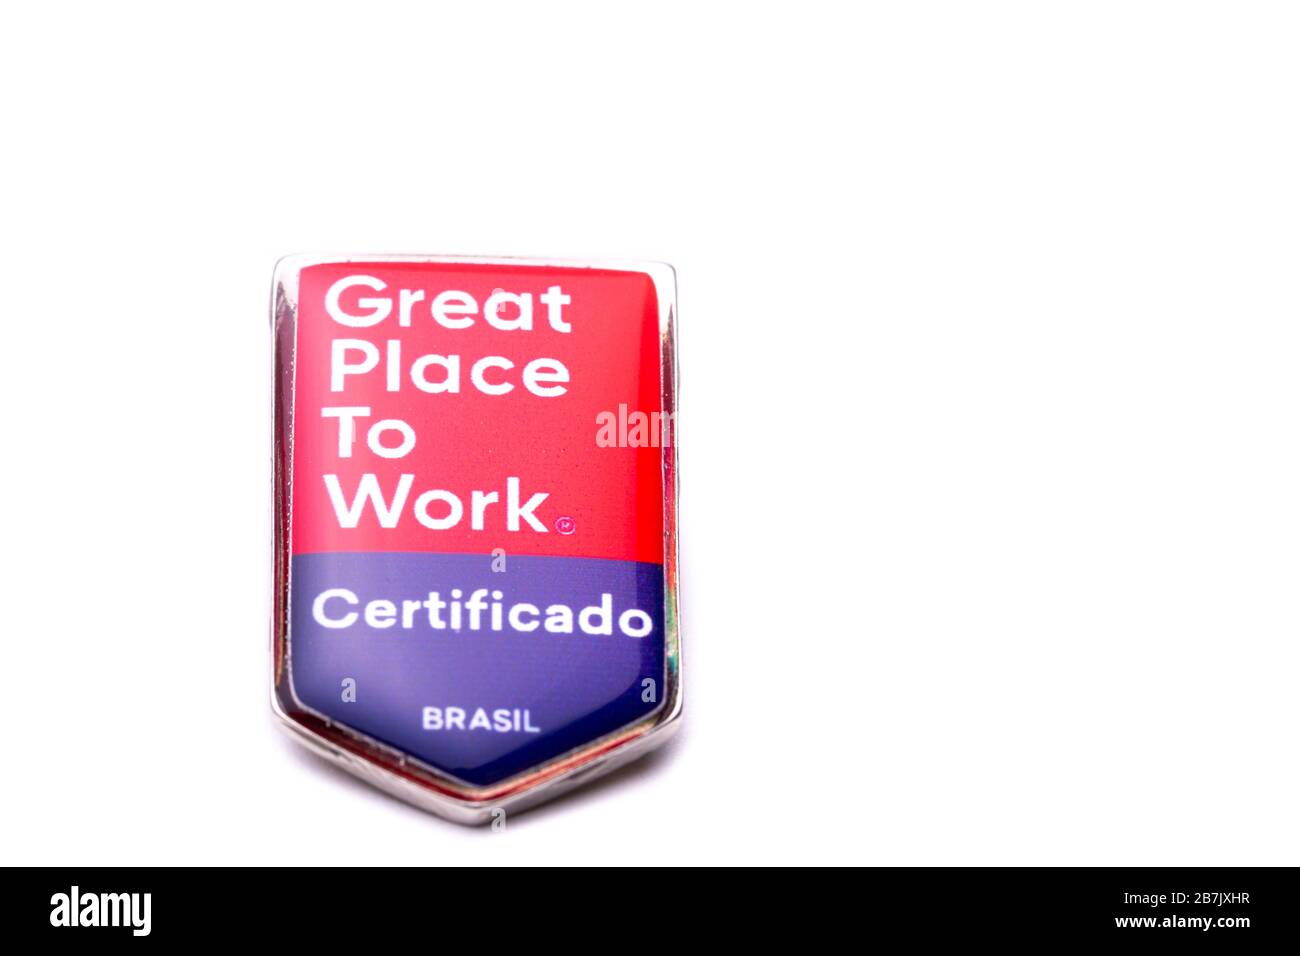 https://c8.alamy.com/comp/2B7JXHR/clasp-pin-brooch-with-great-place-to-work-written-on-a-solid-white-surface-background-translation-certified-brazil-2B7JXHR.jpg